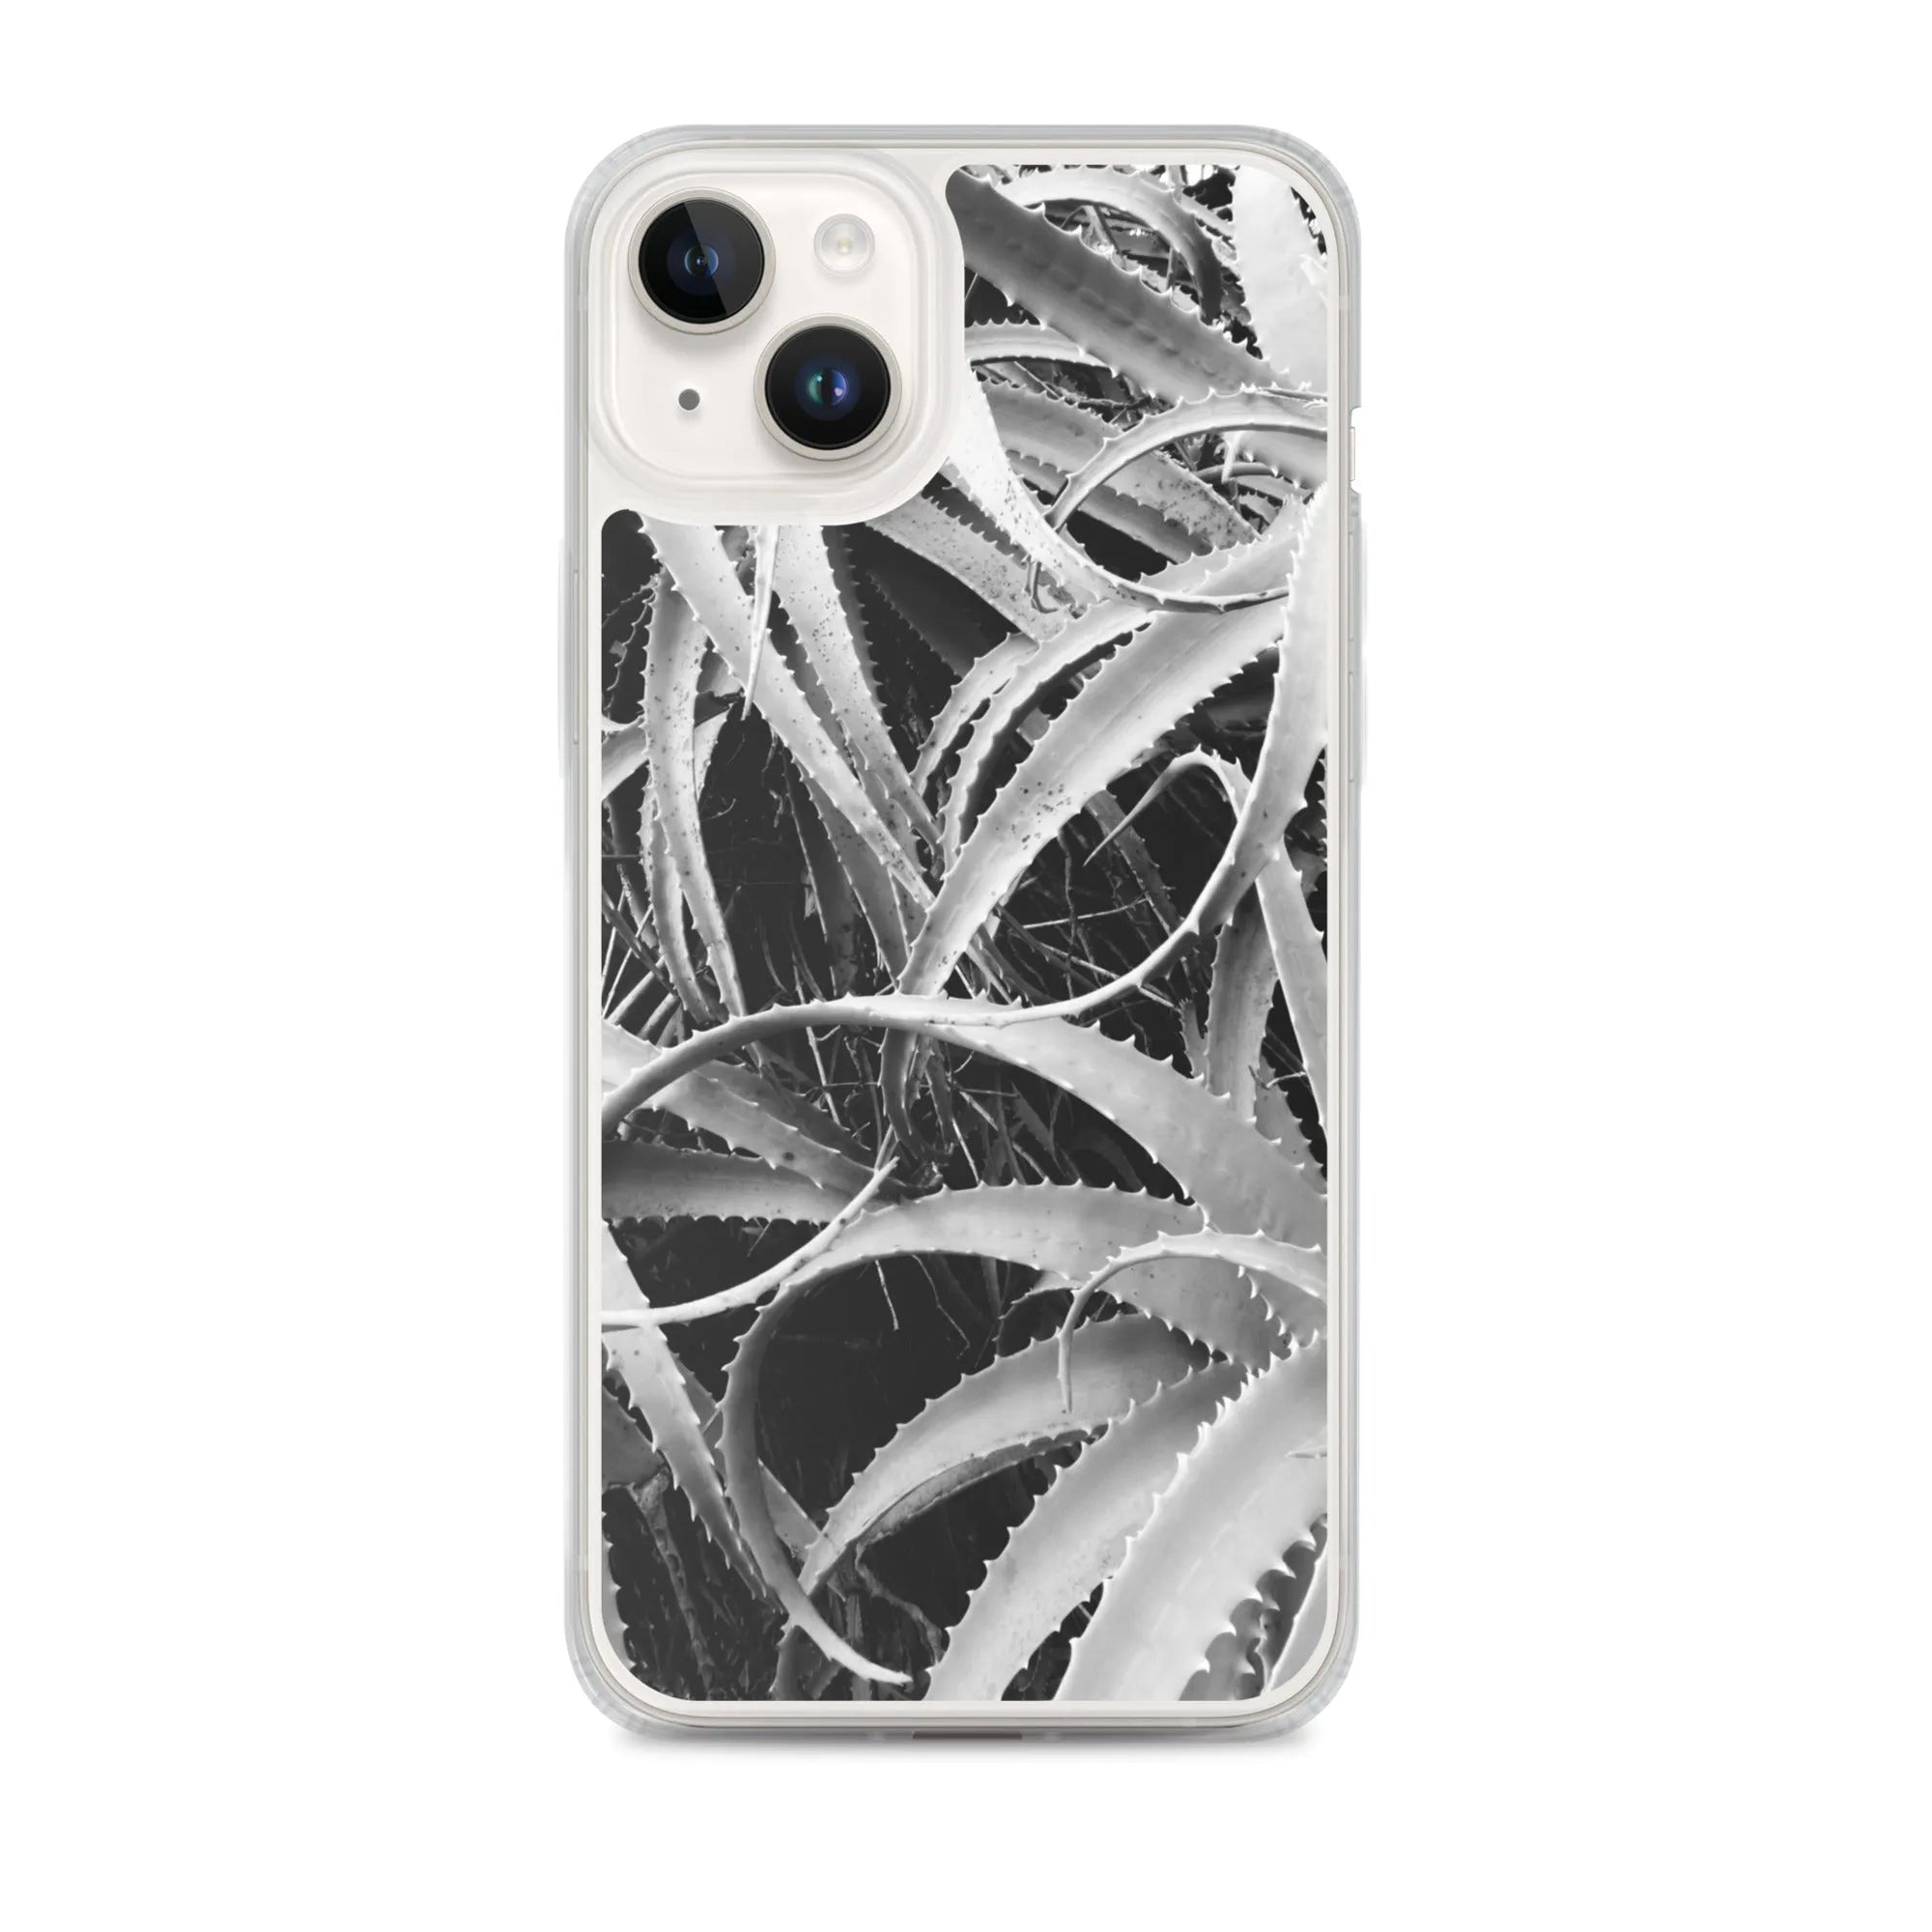 Spiked 2 + Too Botanical Art Iphone Case - Black And White - Iphone 14 Plus - Mobile Phone Cases - Aesthetic Art